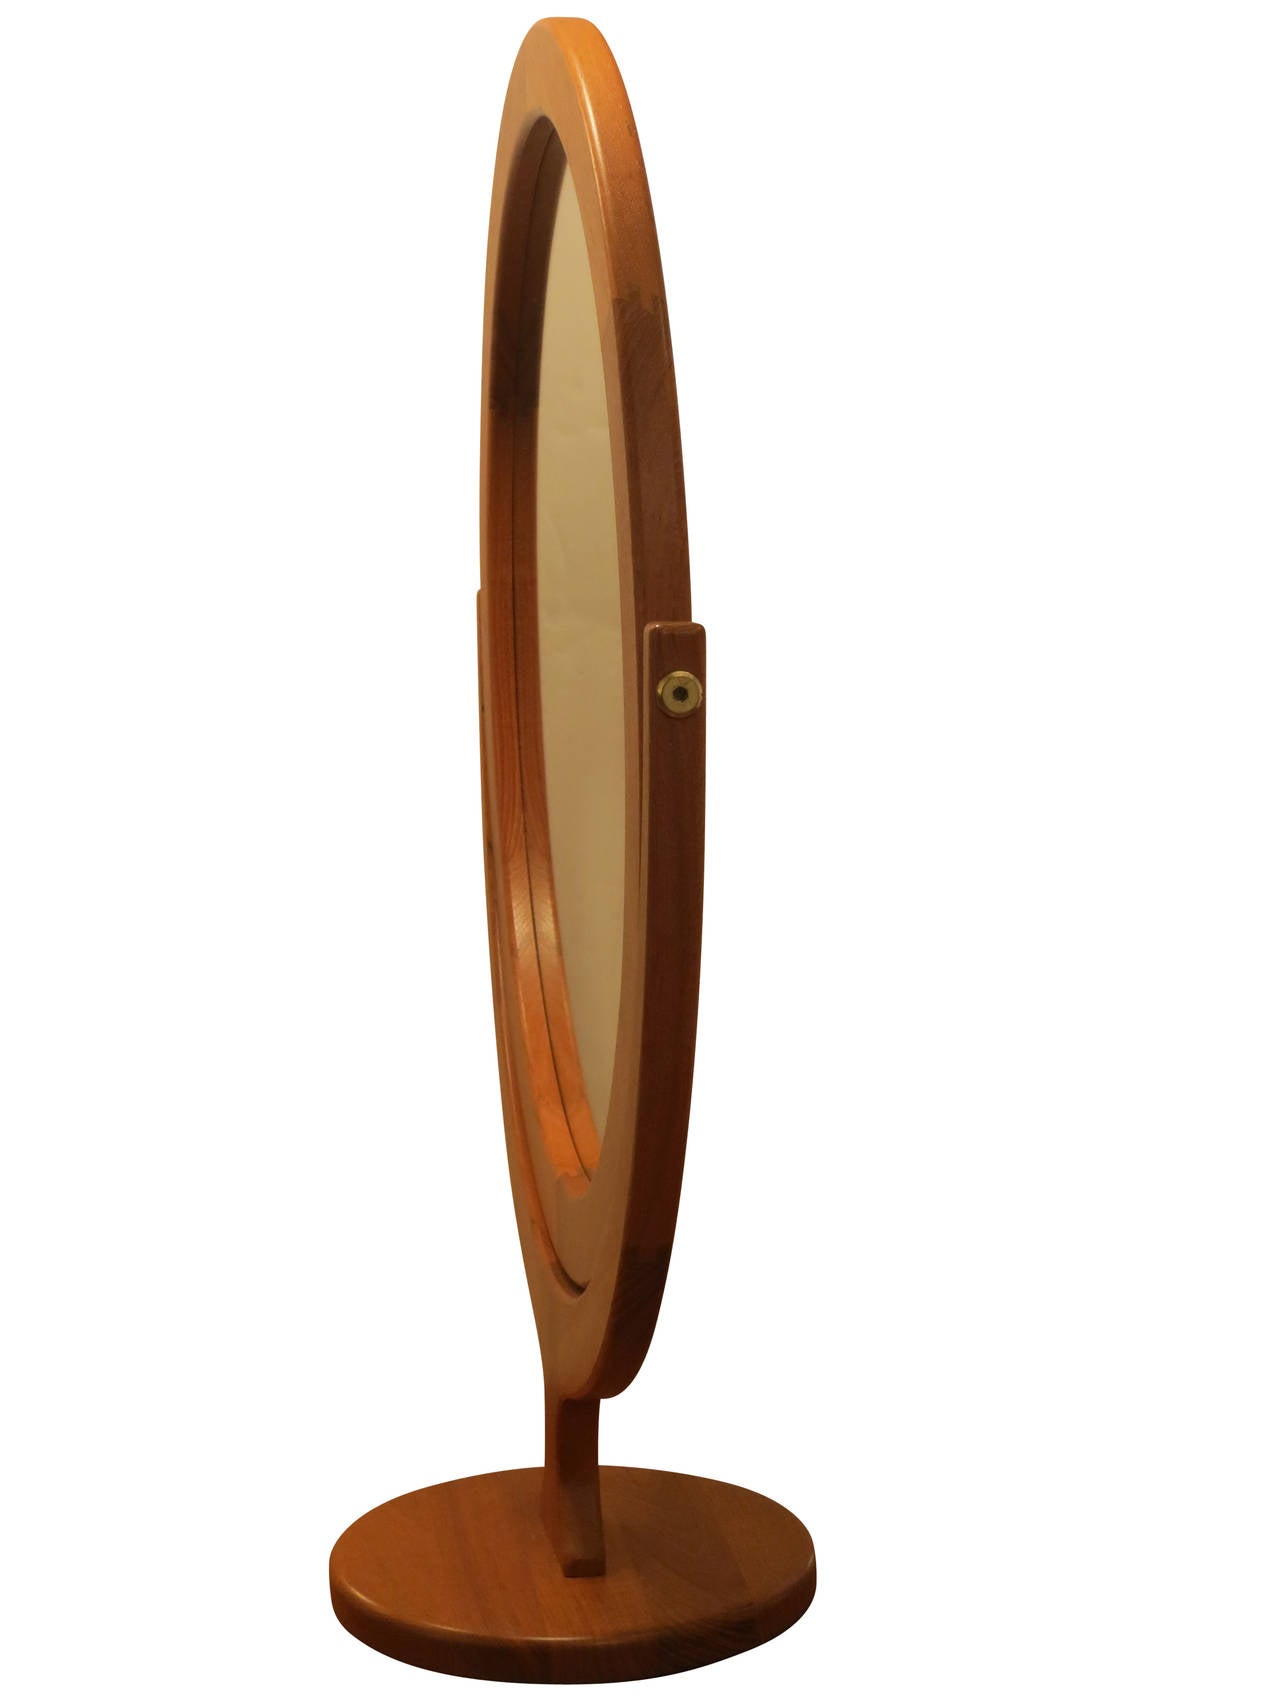 Beautifully proportioned, stylishly simple mirror on stand.